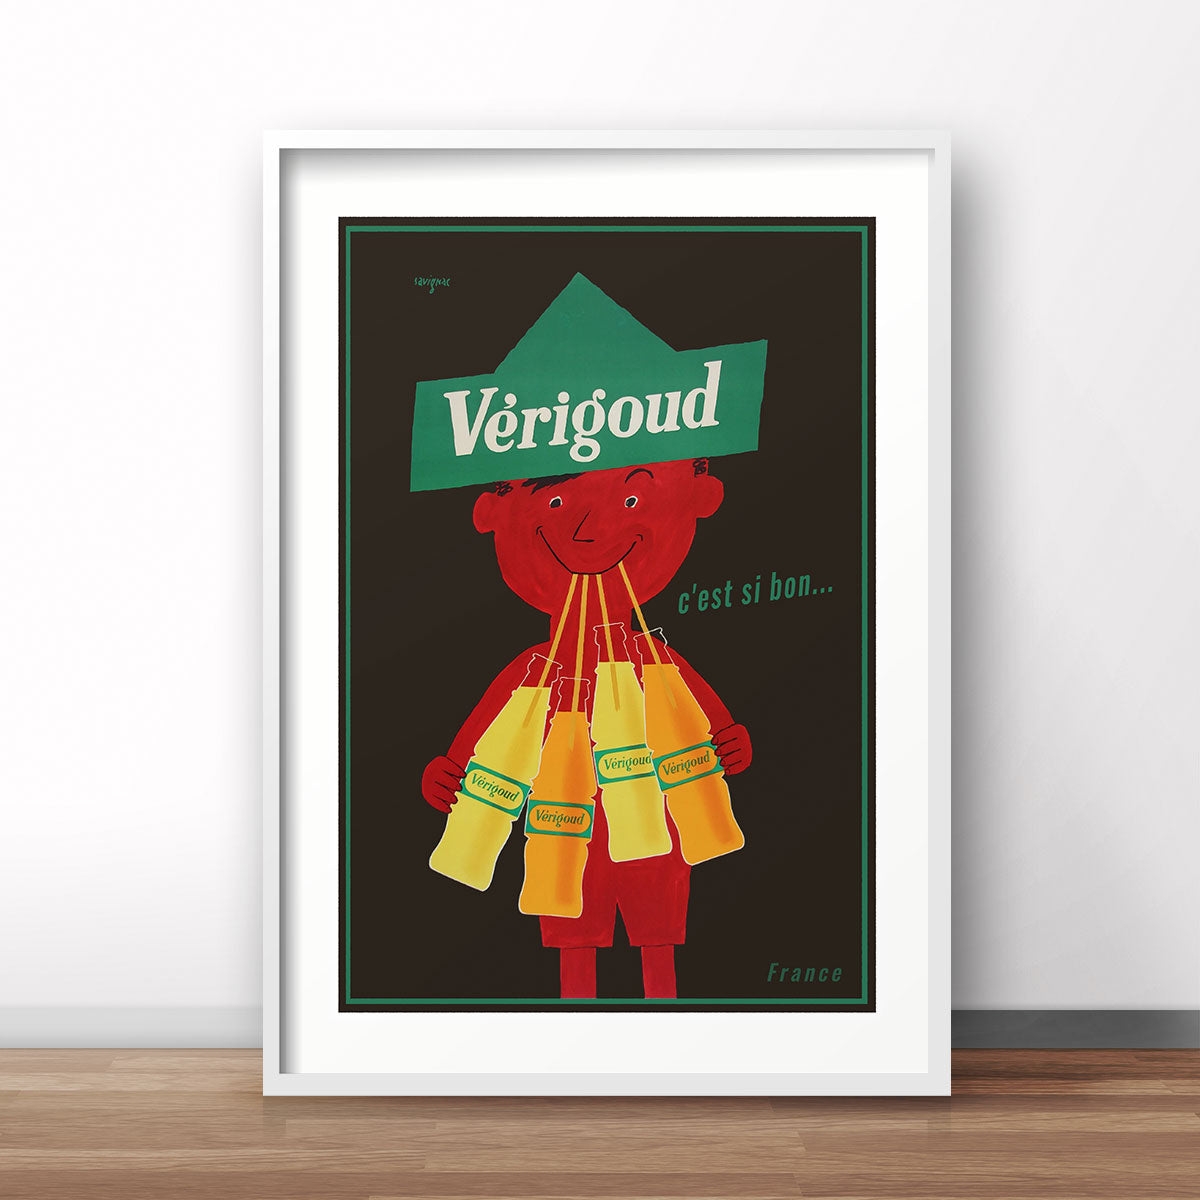 French Verigoud retro vintage advertising poster print from Places We Luv